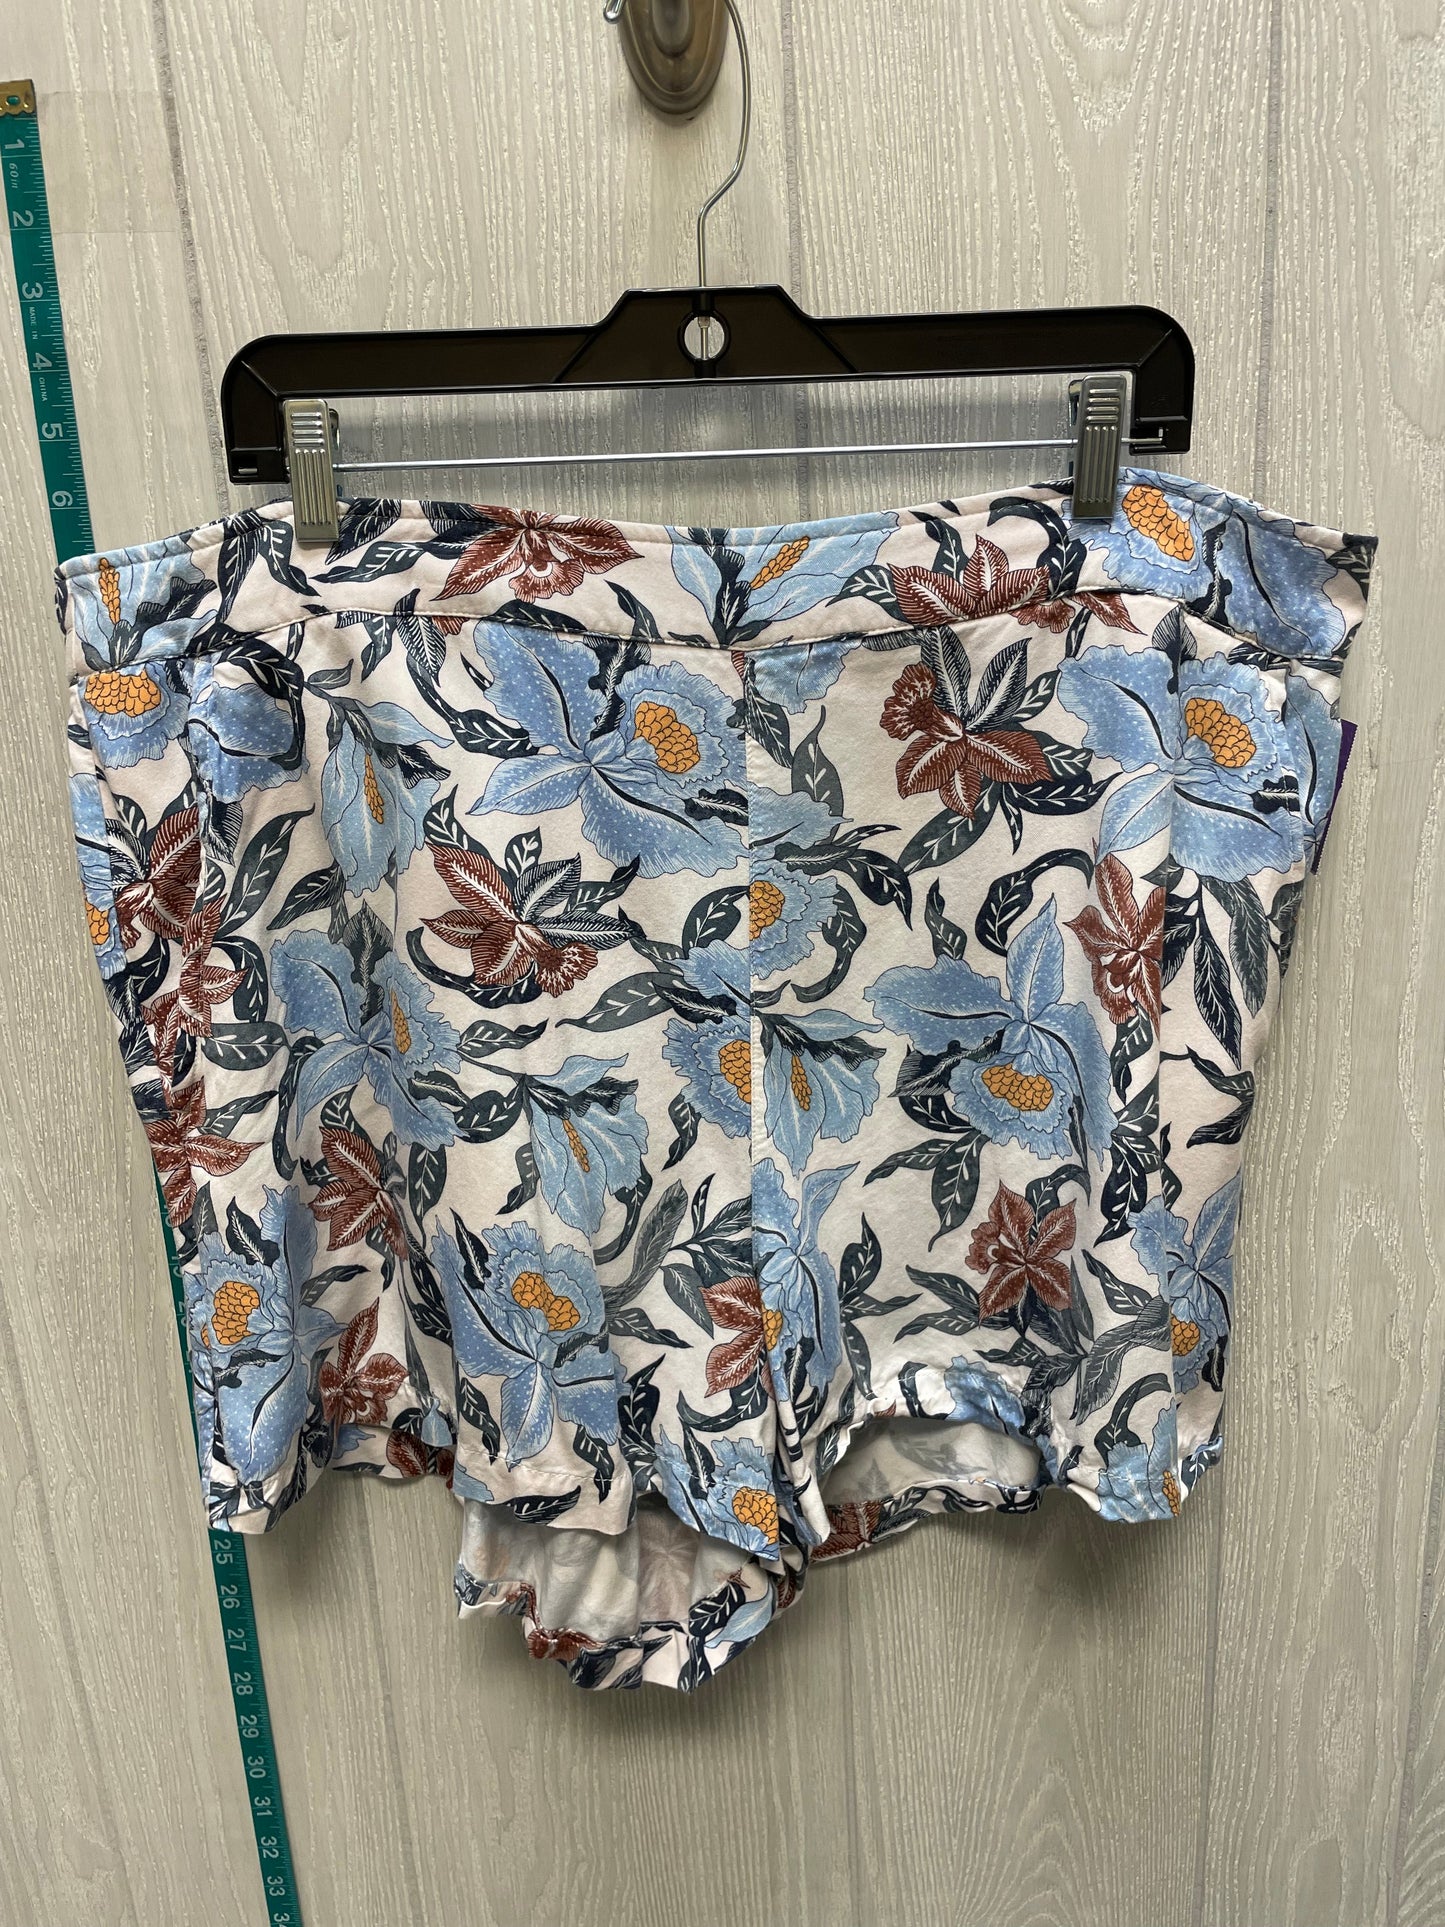 Floral Print Shorts Old Navy, Size 2x